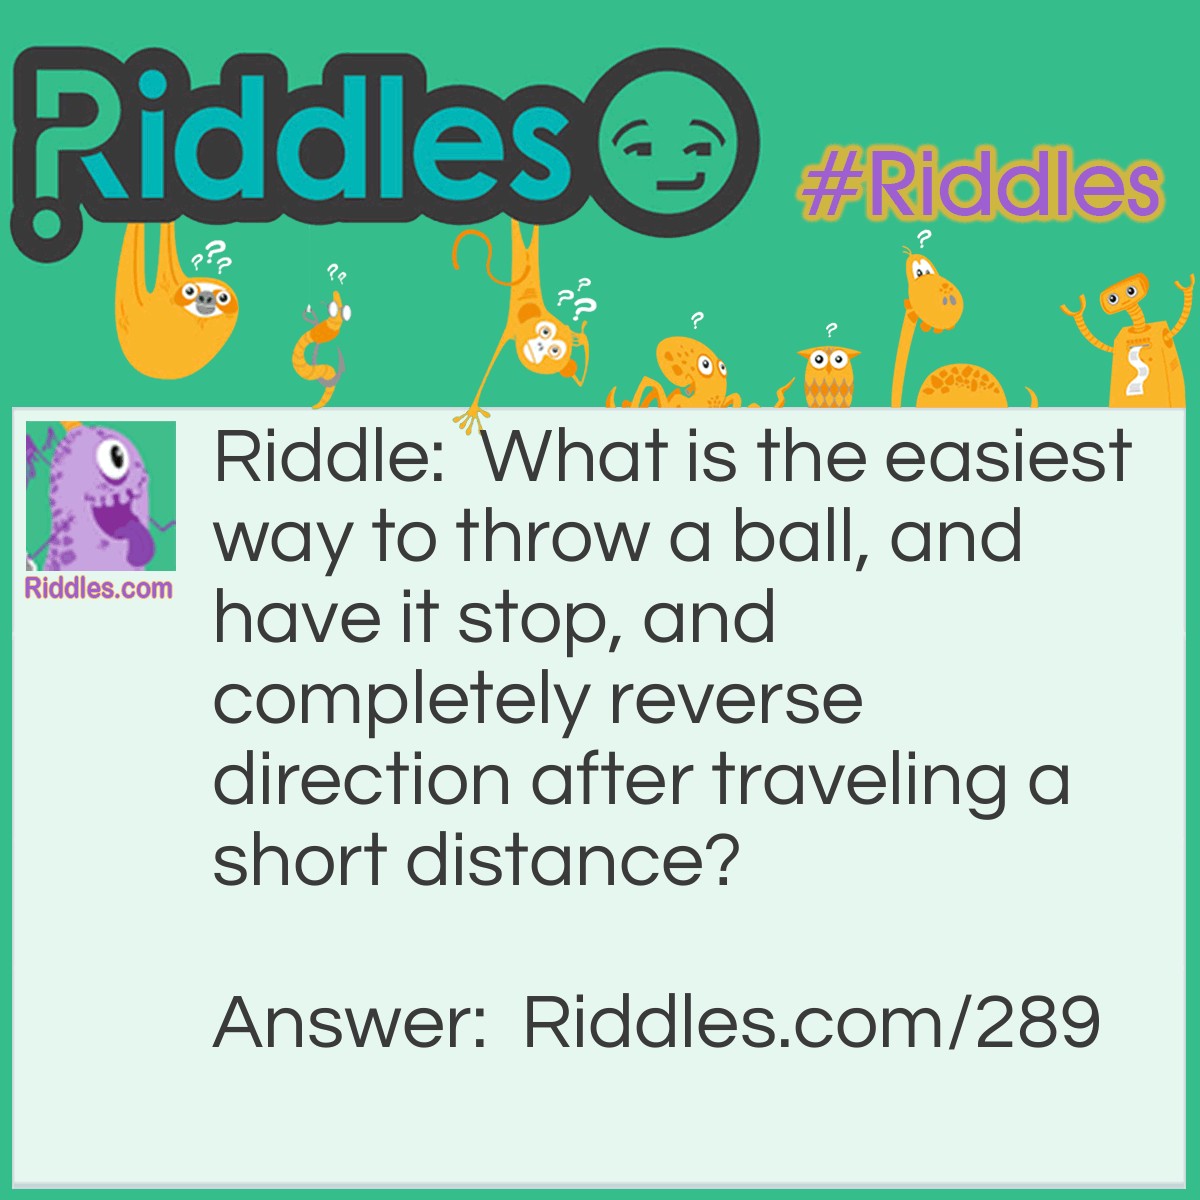 Riddle: What is the easiest way to throw a ball, and have it stop, and completely reverse direction after traveling a short distance? Answer: Toss it in the air.